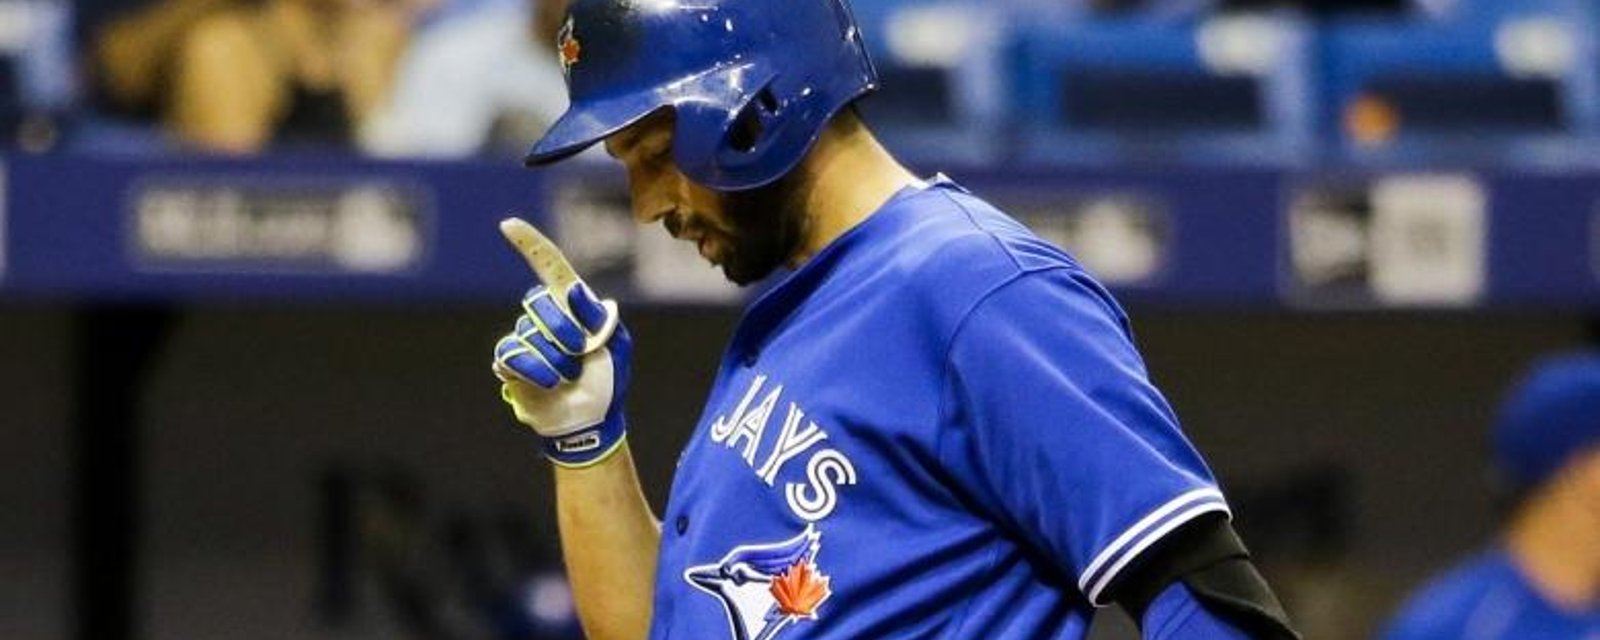 Breaking: Blue Jay suspended for a whopping 80 games by MLB.